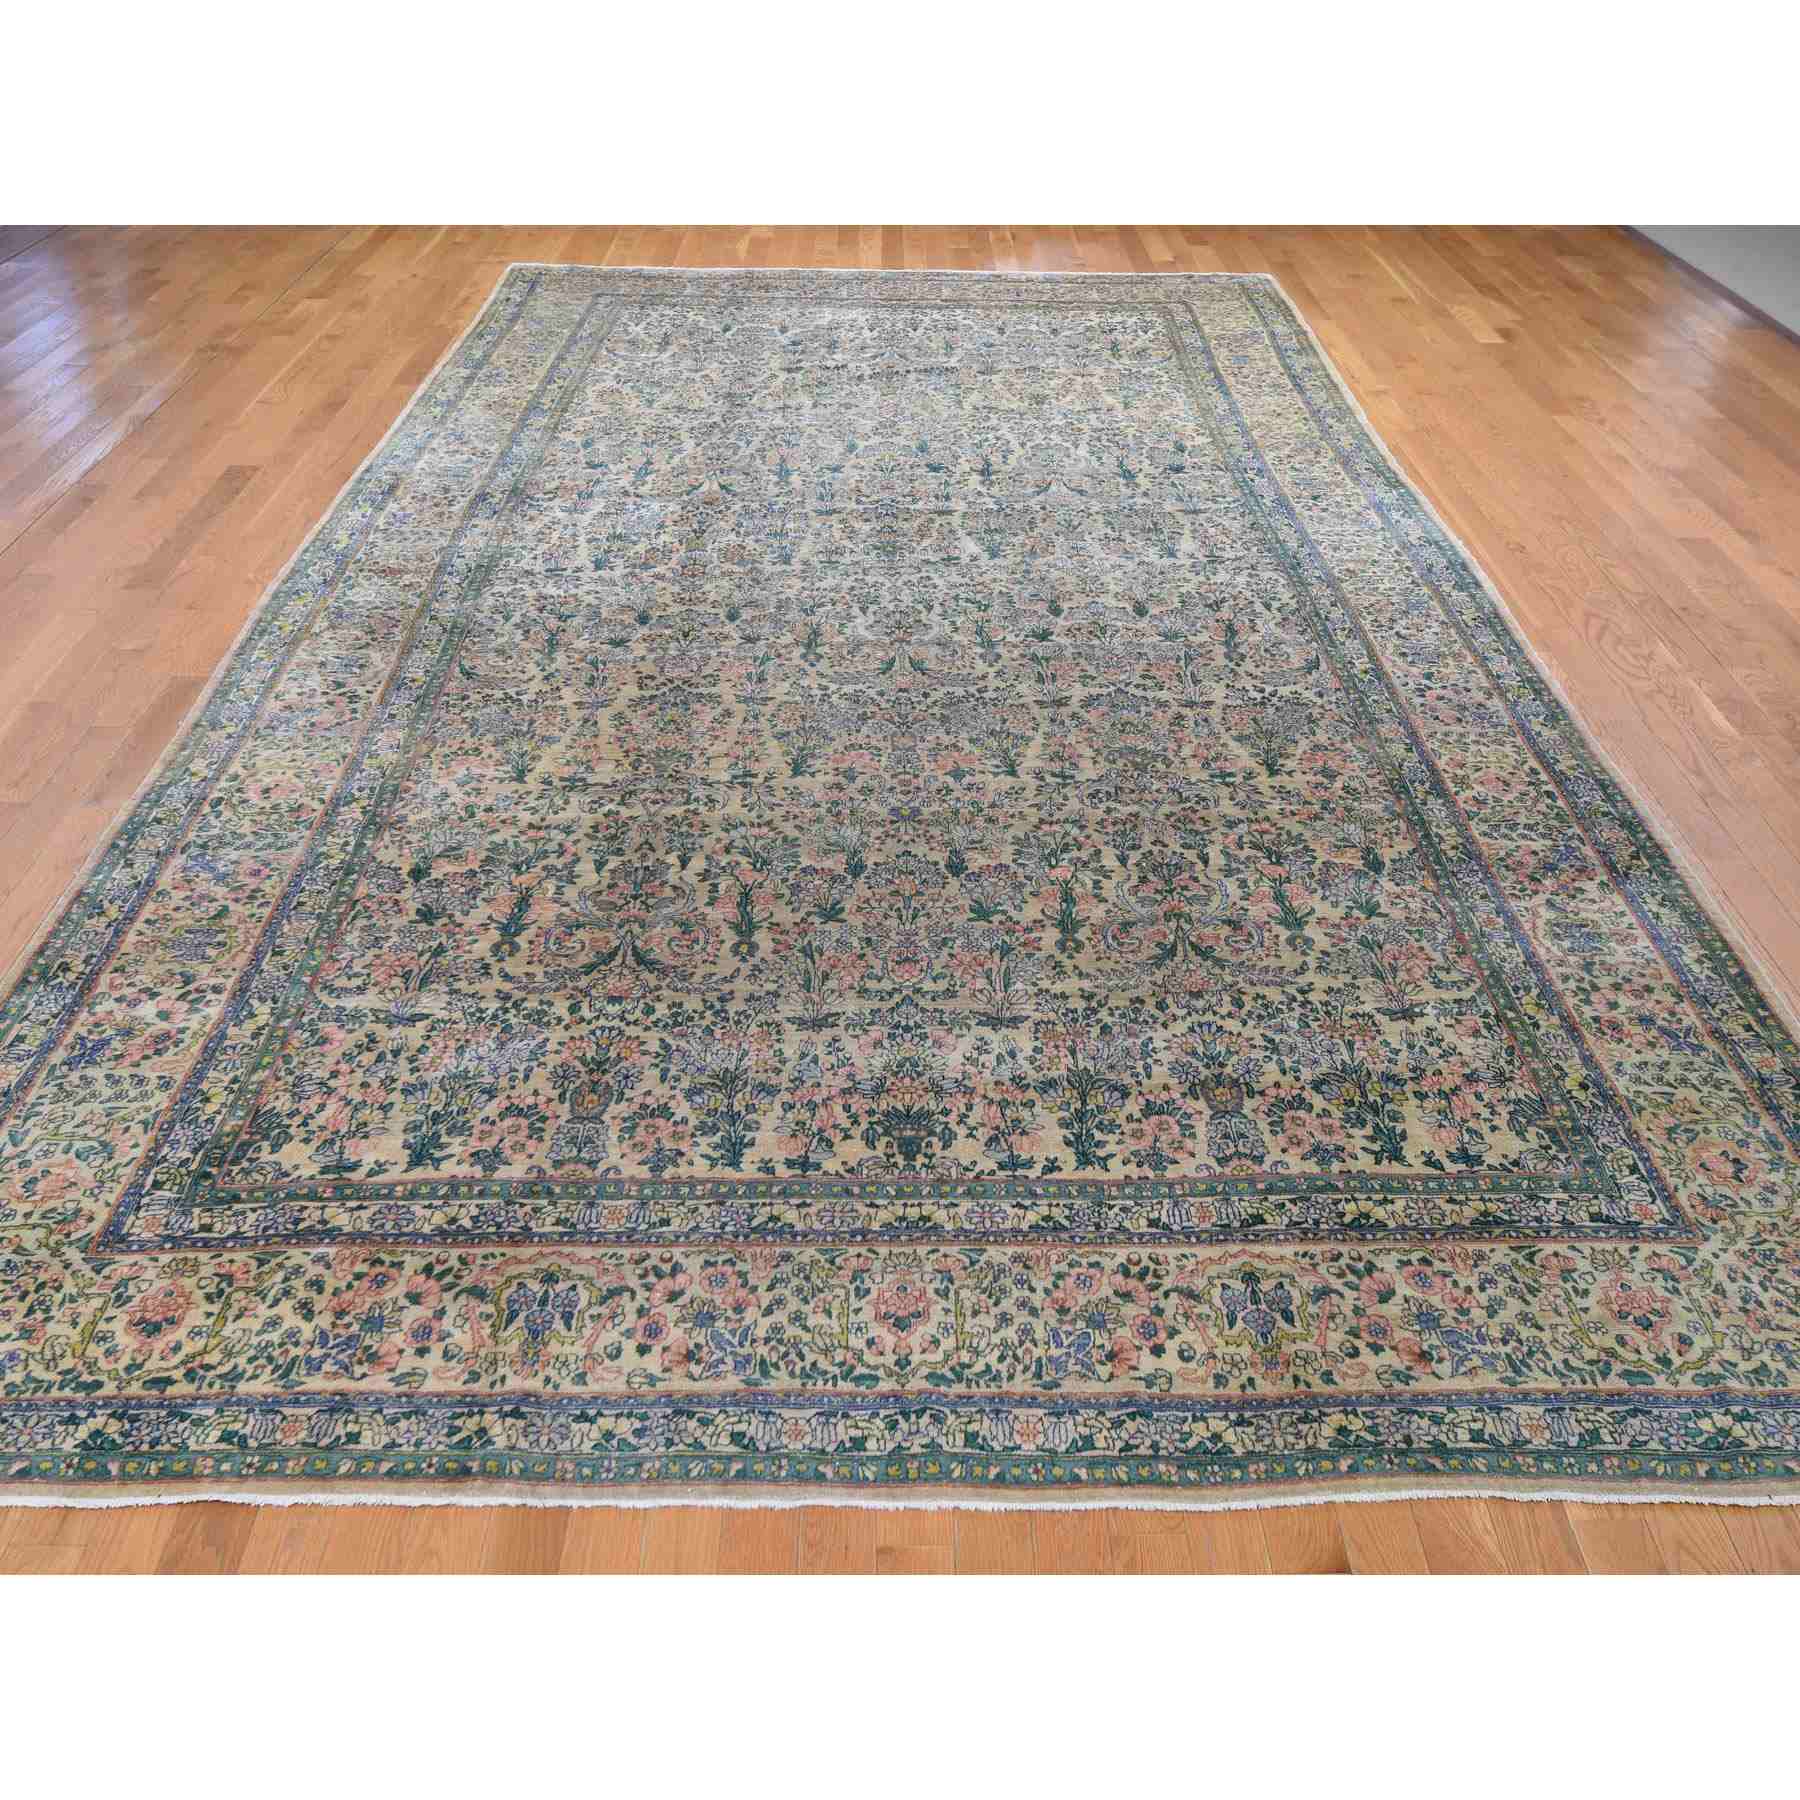 Antique-Hand-Knotted-Rug-242300